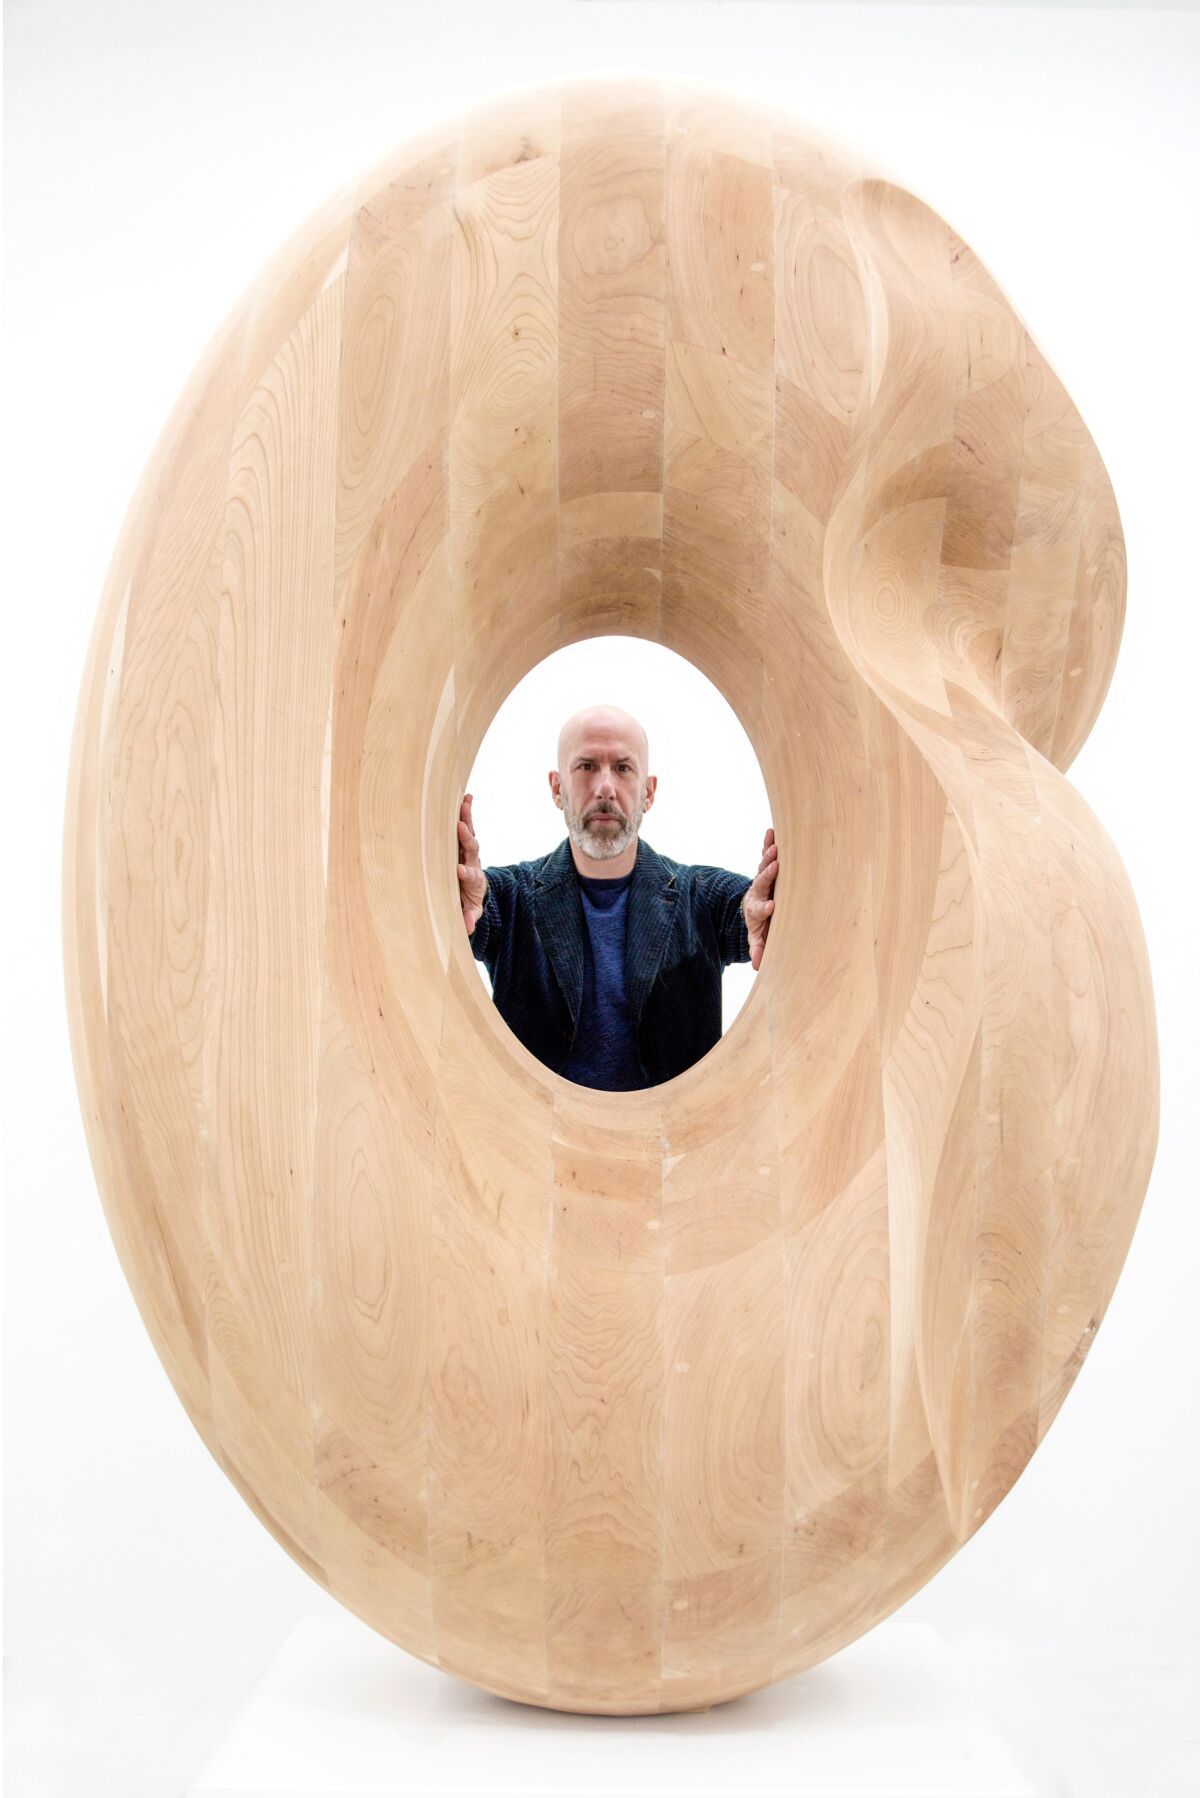 Artist Douglas Tausik Ryder with one of his technology-assisted wooden sculptures.